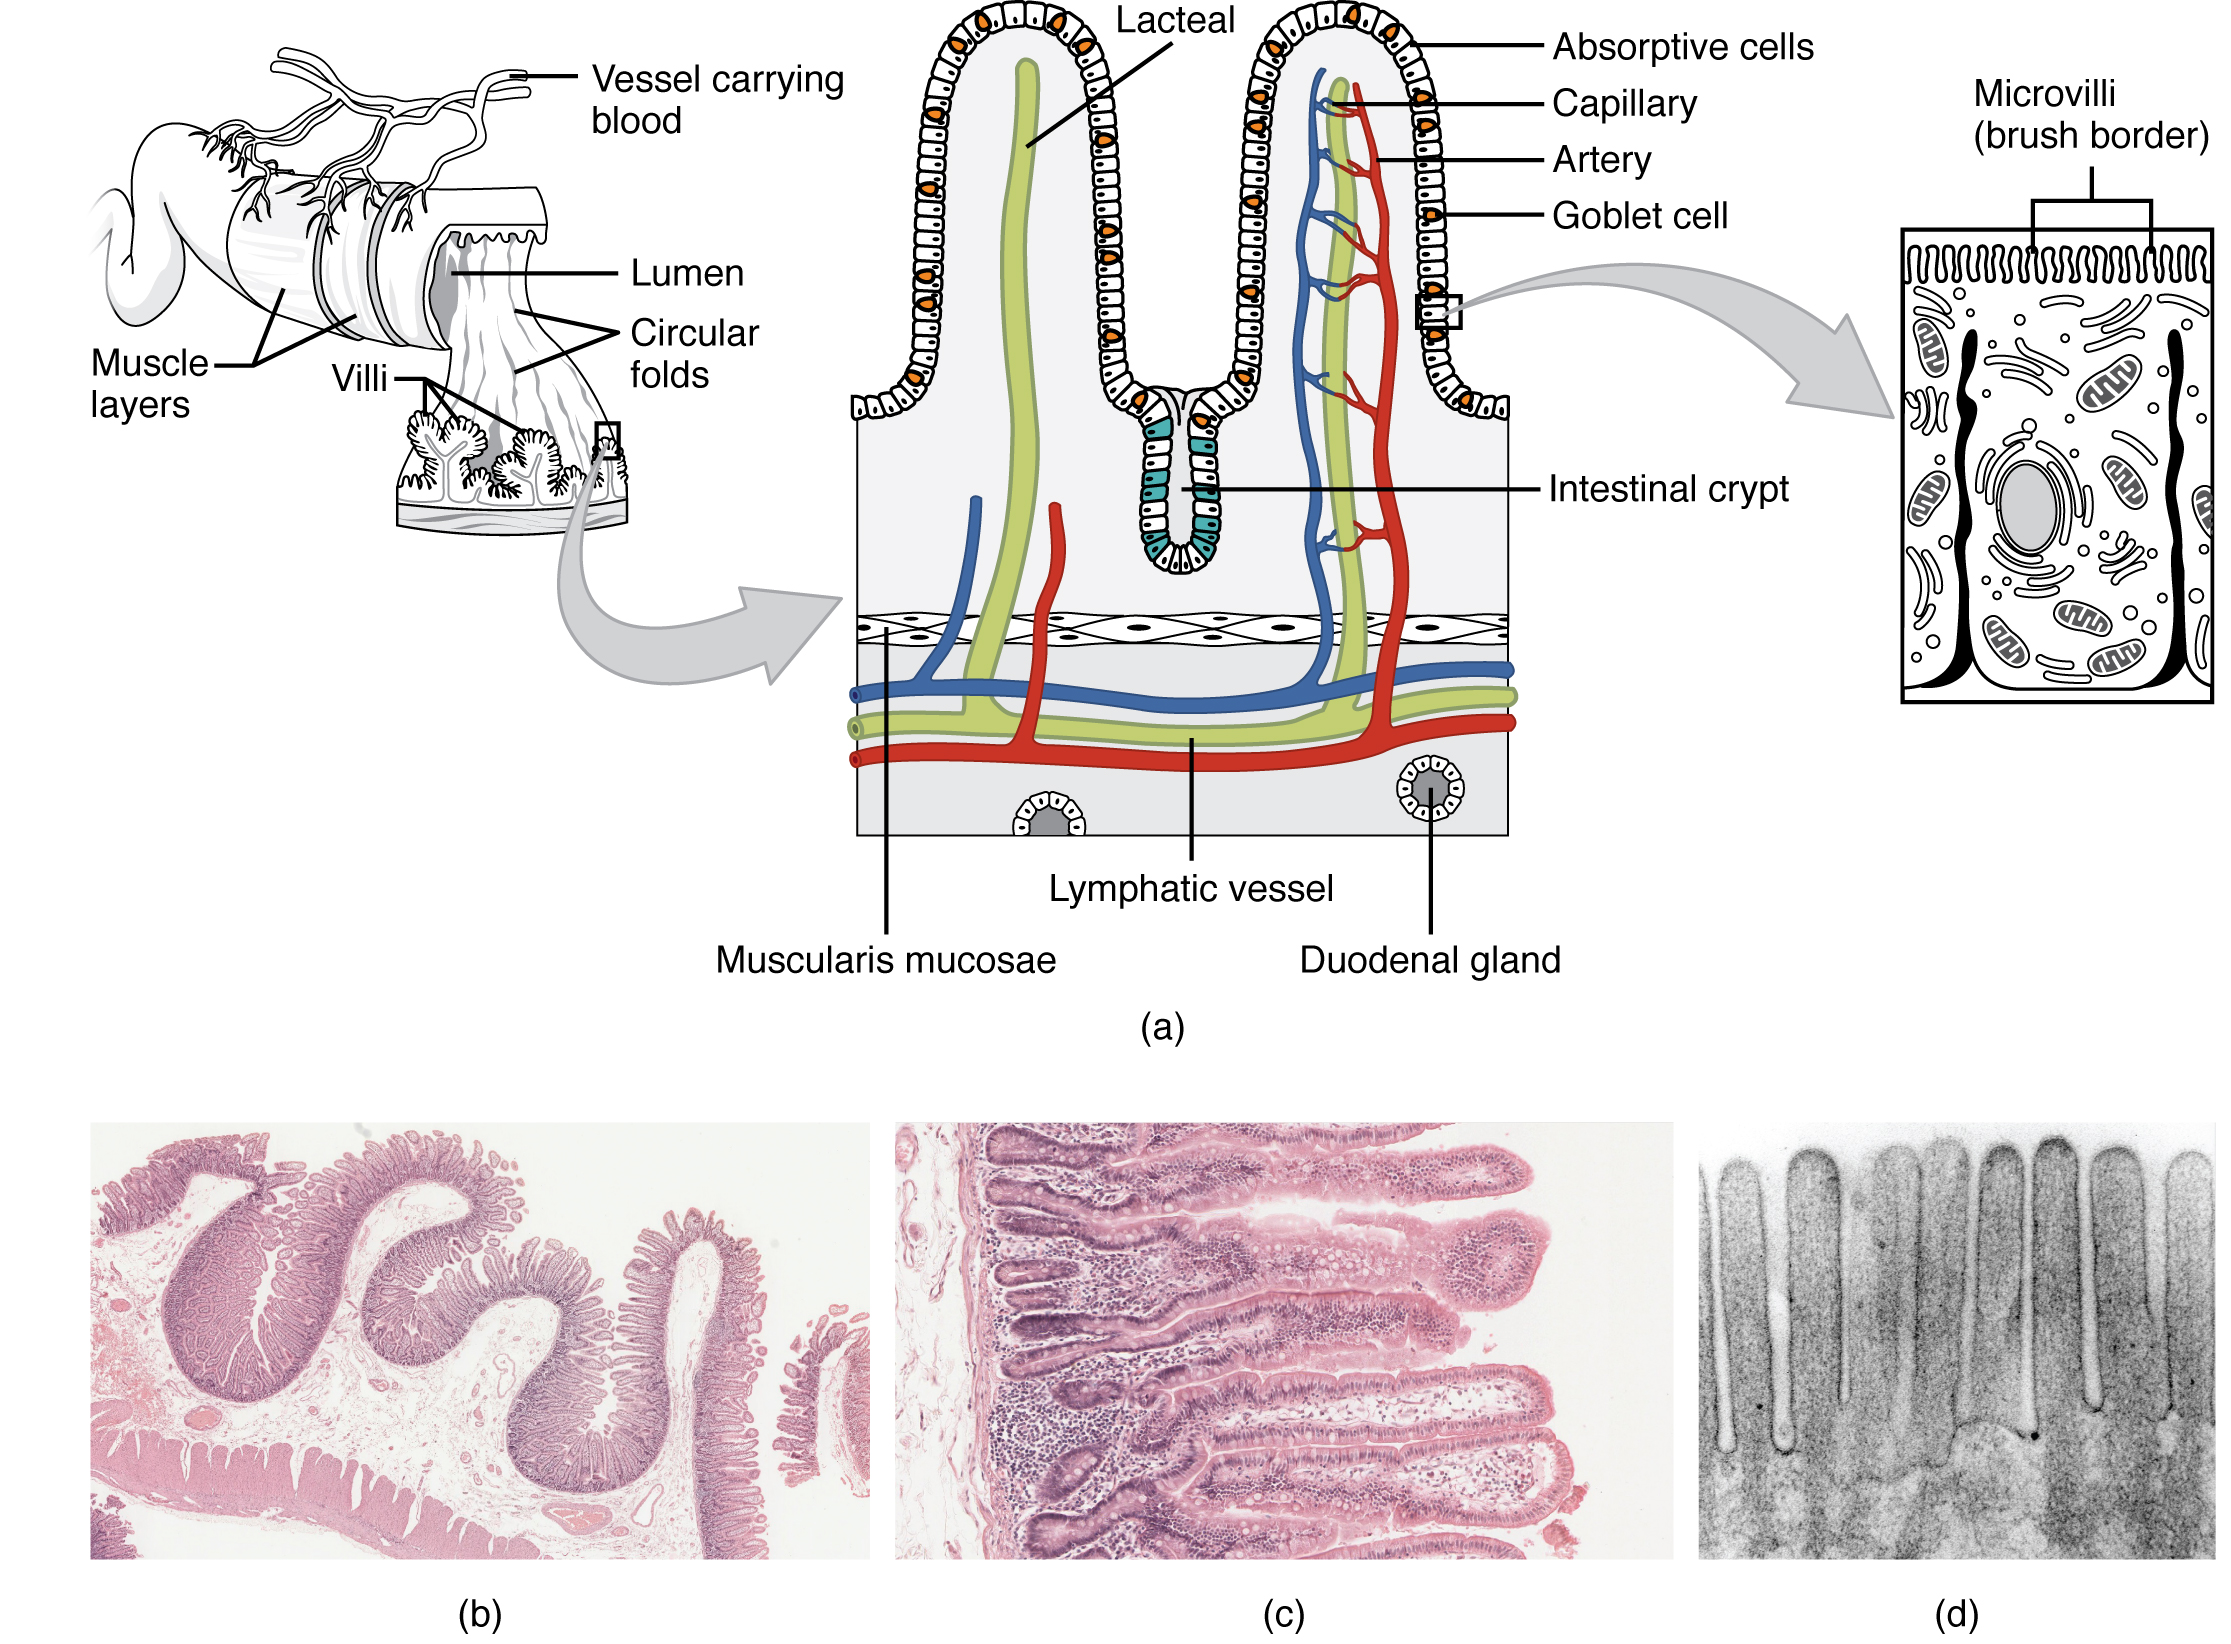 Illustration (a) shows the histological cross-section of the small intestine. The left panel shows a small region of the small intestine, along with the blood vessels and the muscle layers. The middle panel shows a magnified view of a small region of the small intestine, highlighting the absorptive cells, the lacteal and the goblet cells. The right panel shows a further magnified view of the epithelial cells including the microvilli. Illustrations (b) shows a micrograph of the circular folds, and illustration (c) shows a micrograph of the villi. Illustration (d) shows an electron micrograph of the microvilli.